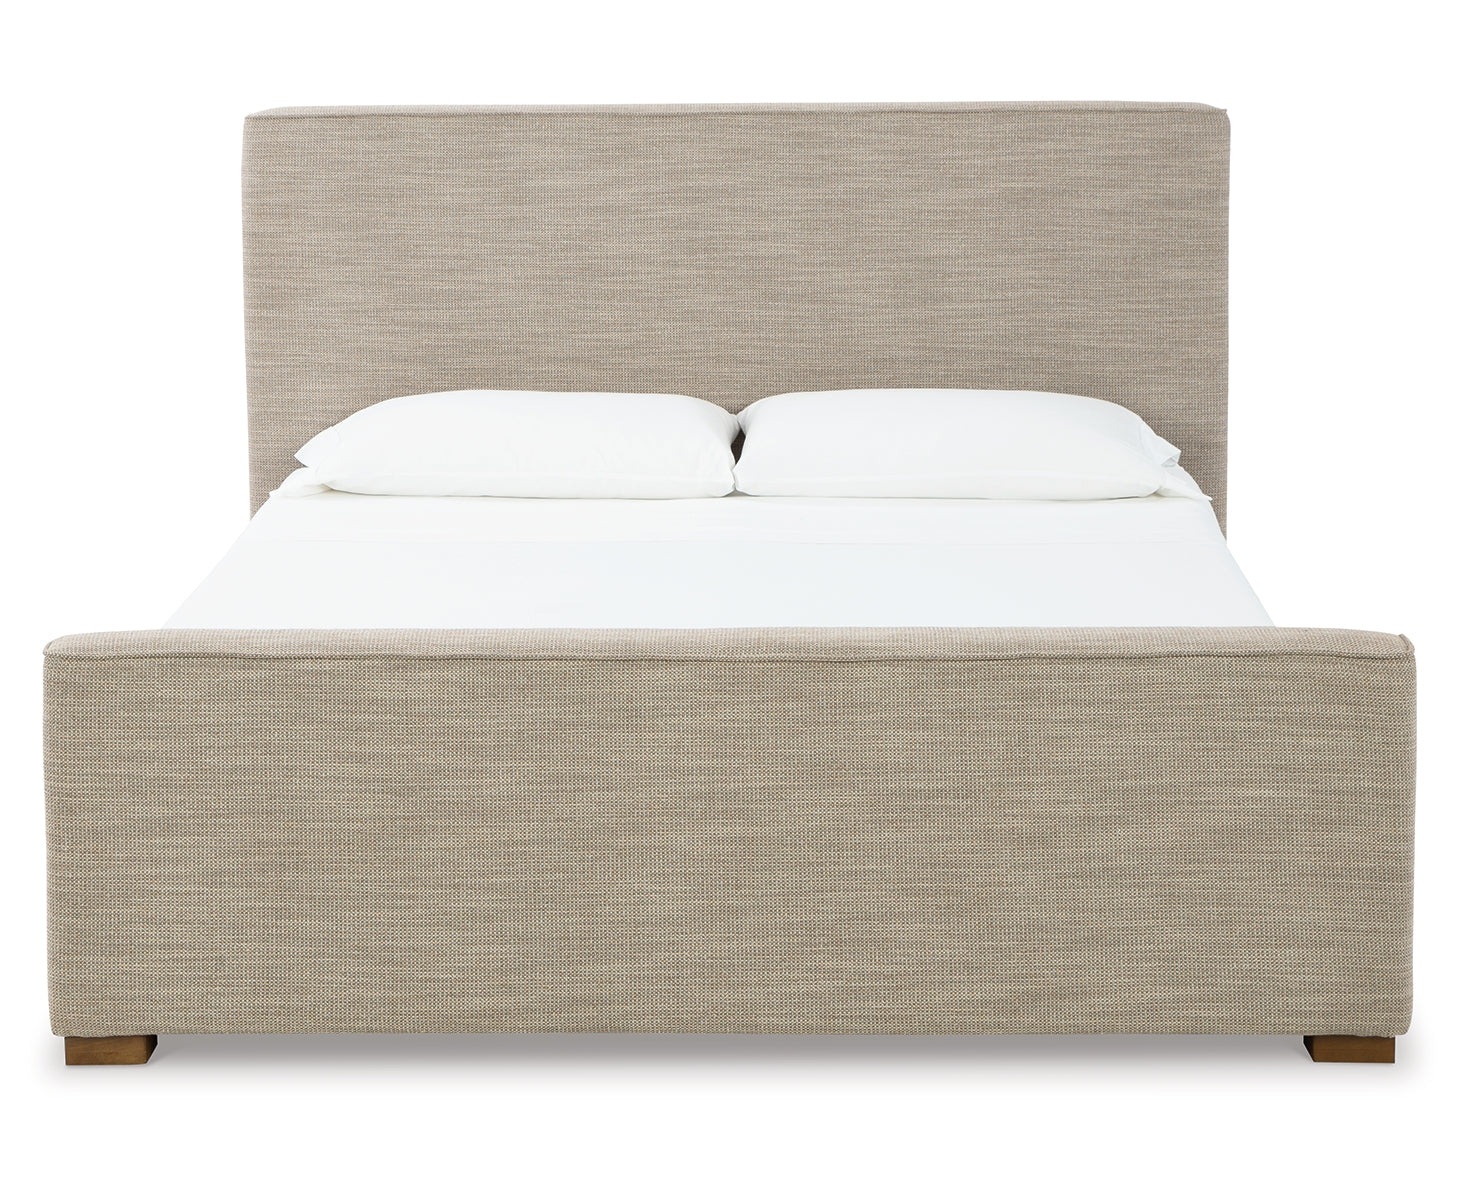 Dakmore Queen Upholstered Bed with Dresser